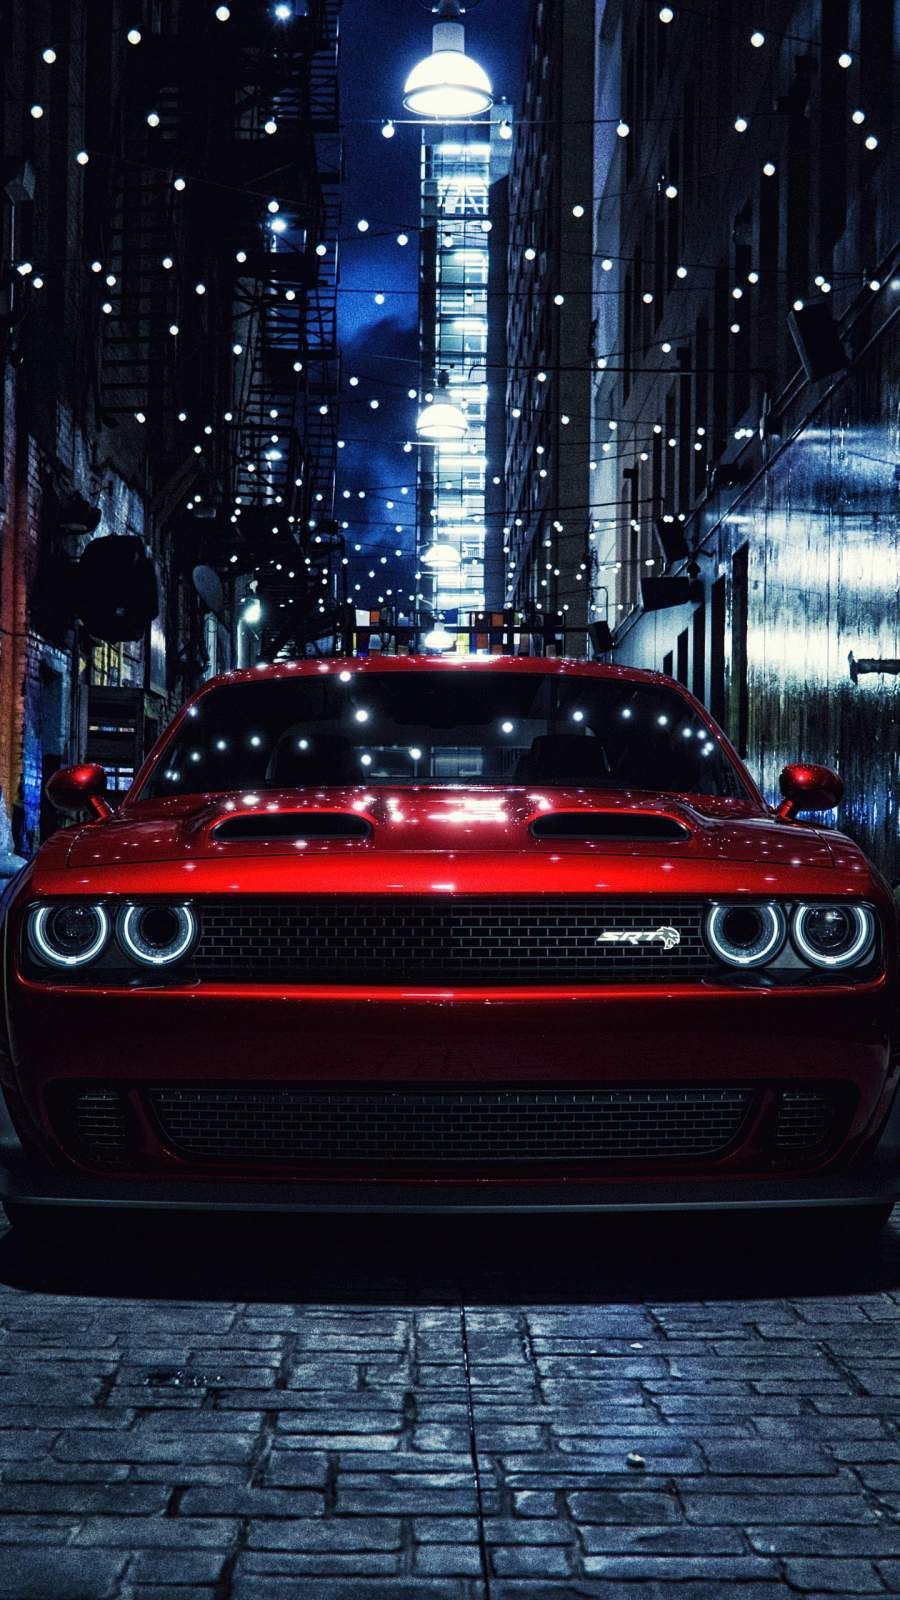 iPhone Wallpaper for iPhone iPhone 8 Plus, iPhone 6s, iPhone 6s Plus, iPhone X and iPod Touch. Dodge challenger srt, Charger srt hellcat, Challenger srt demon